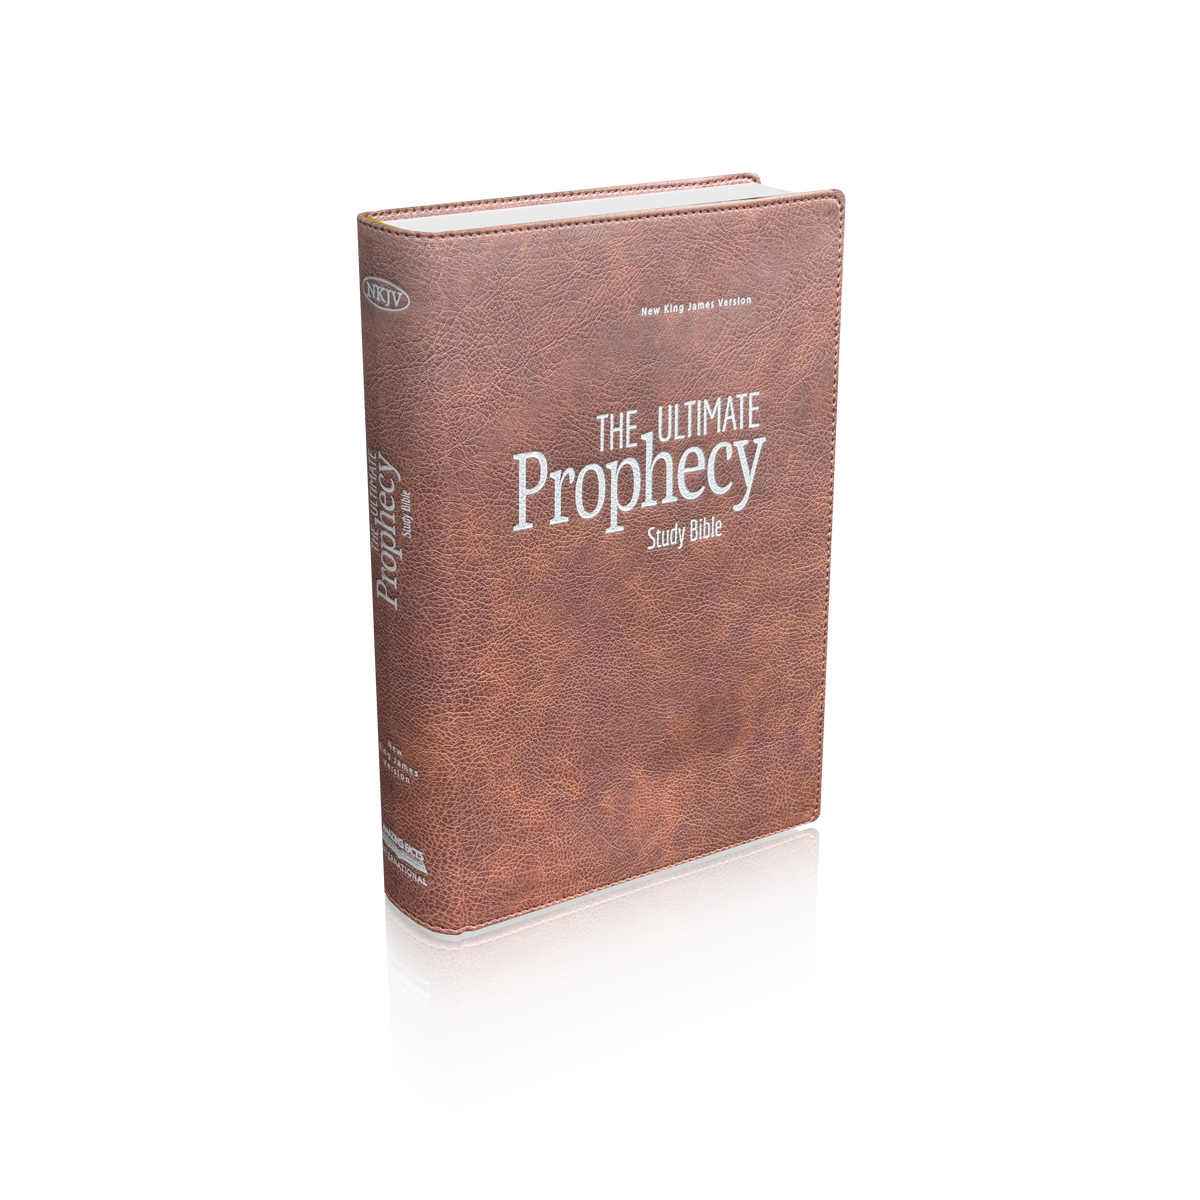 The Ultimate Prophecy Study Bible (Brown Leathersoft) by Amazing Facts